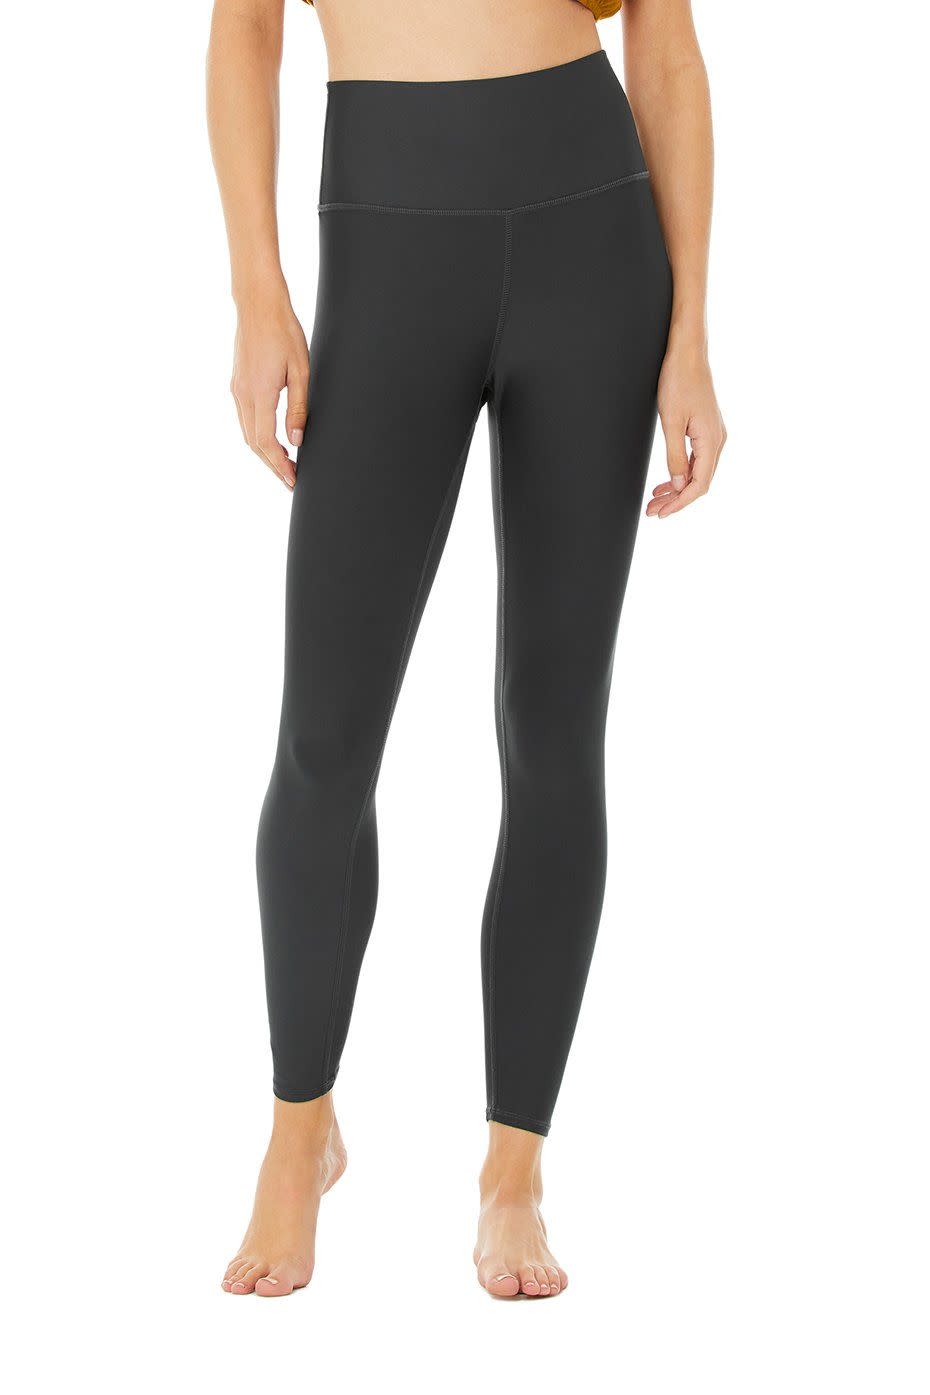 7) High-Waist Airlift Legging in Anthracite